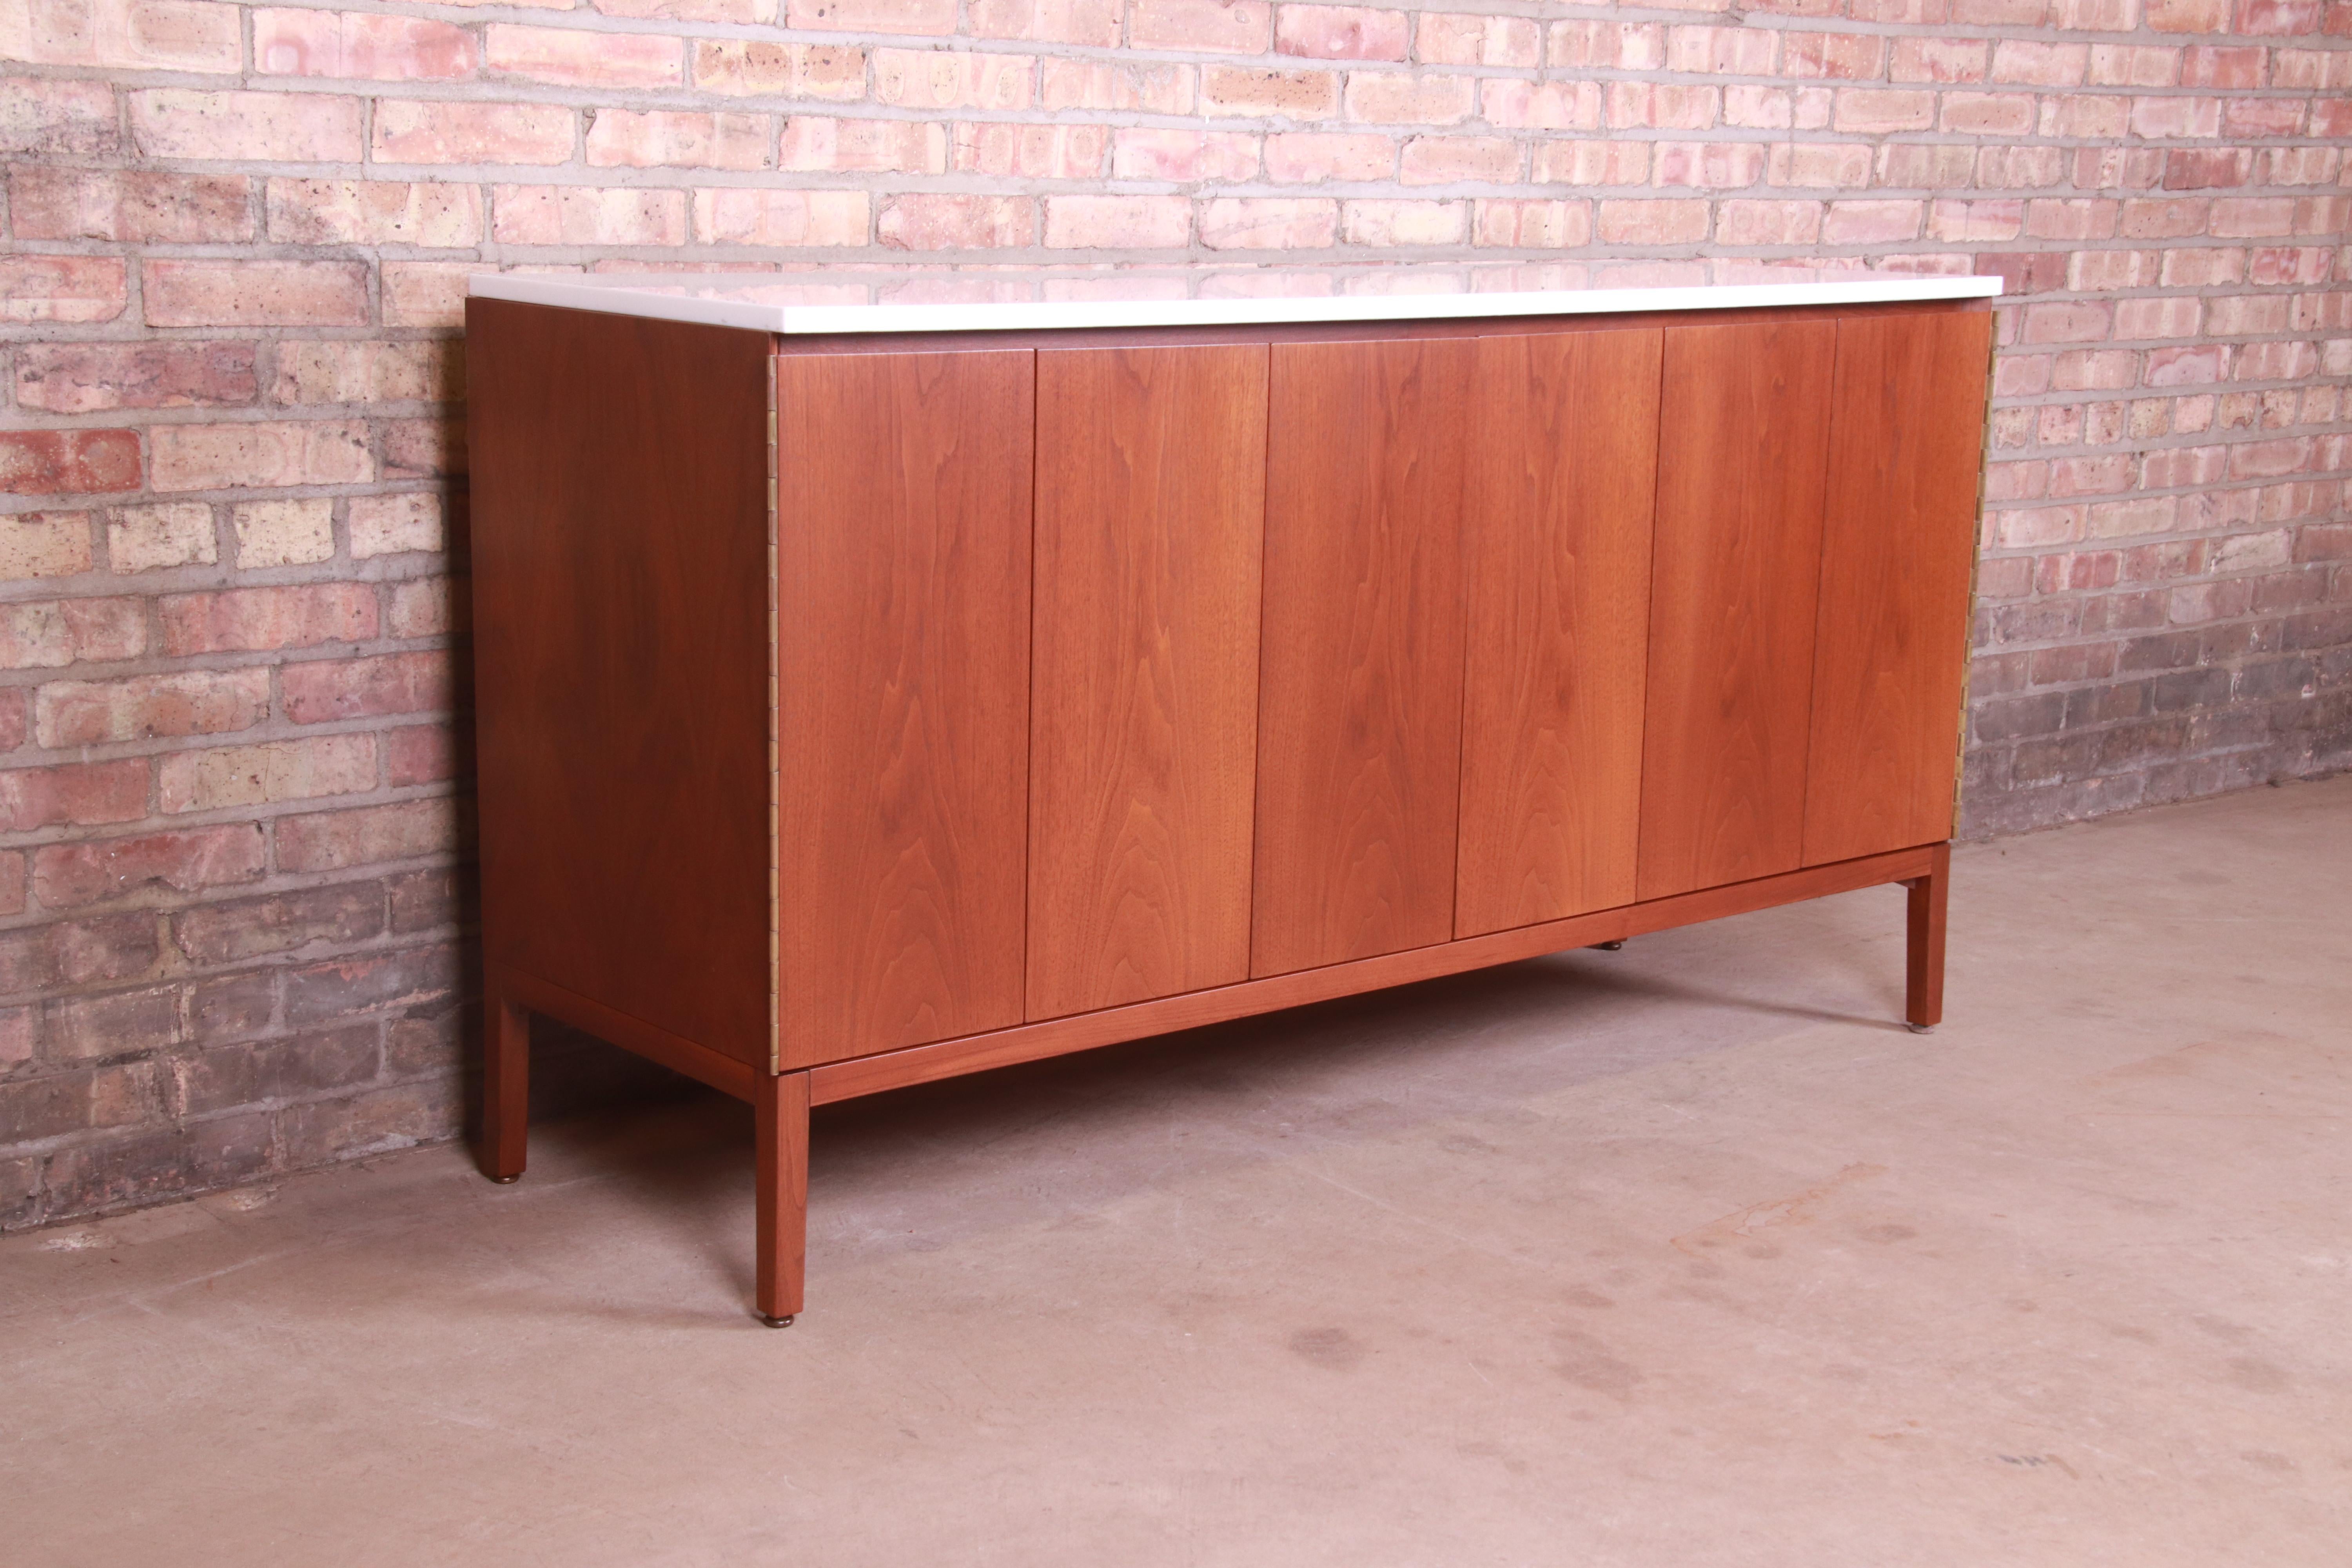 Mid-20th Century Paul McCobb for Directional Mahogany Credenza or Bar Cabinet, Newly Refinished